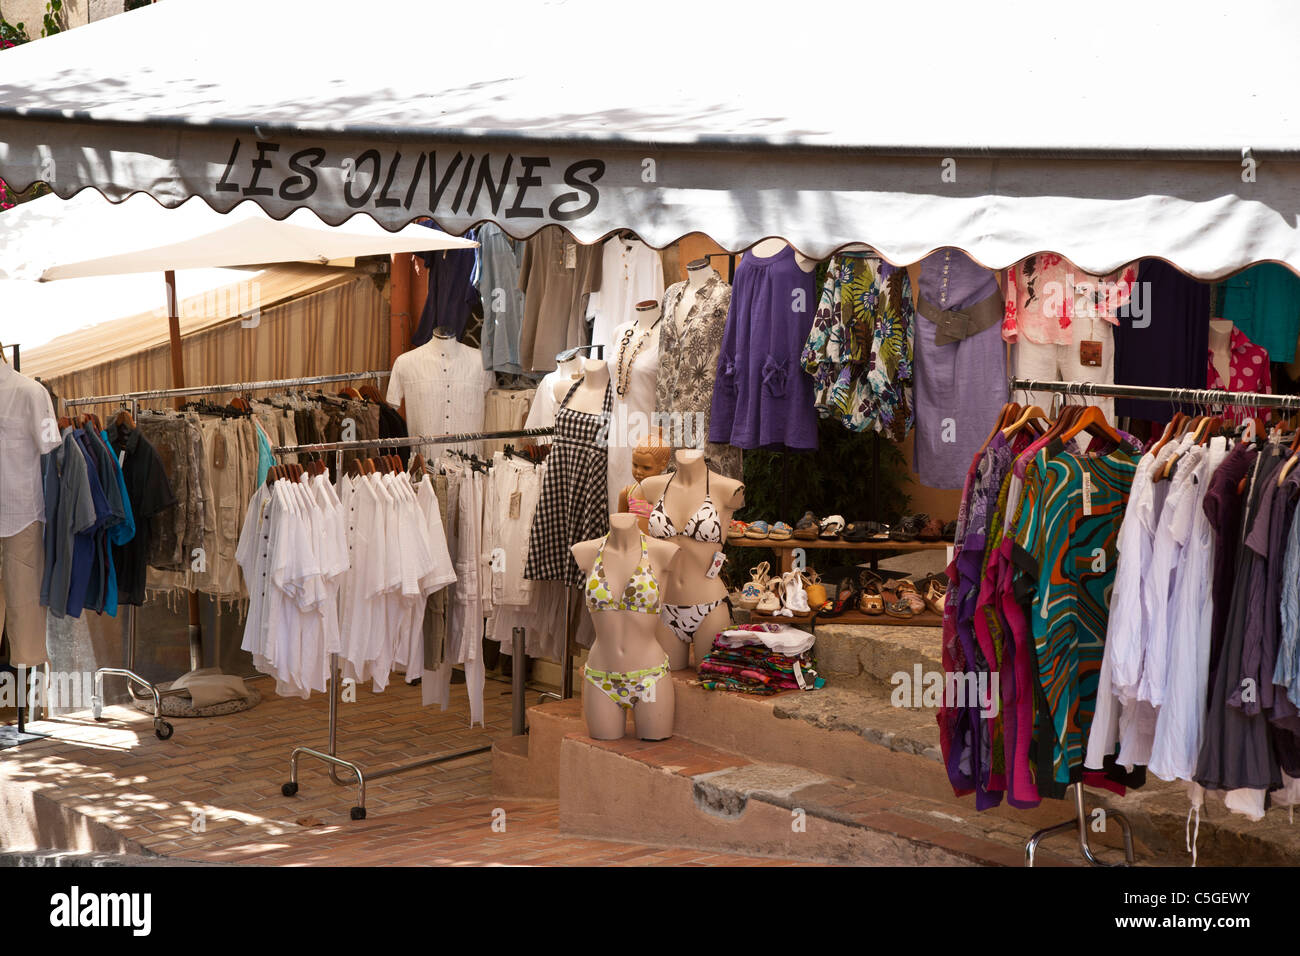 Clothes shop with outdoor display showing clothes on racks, Fayence, Provence, France Stock Photo